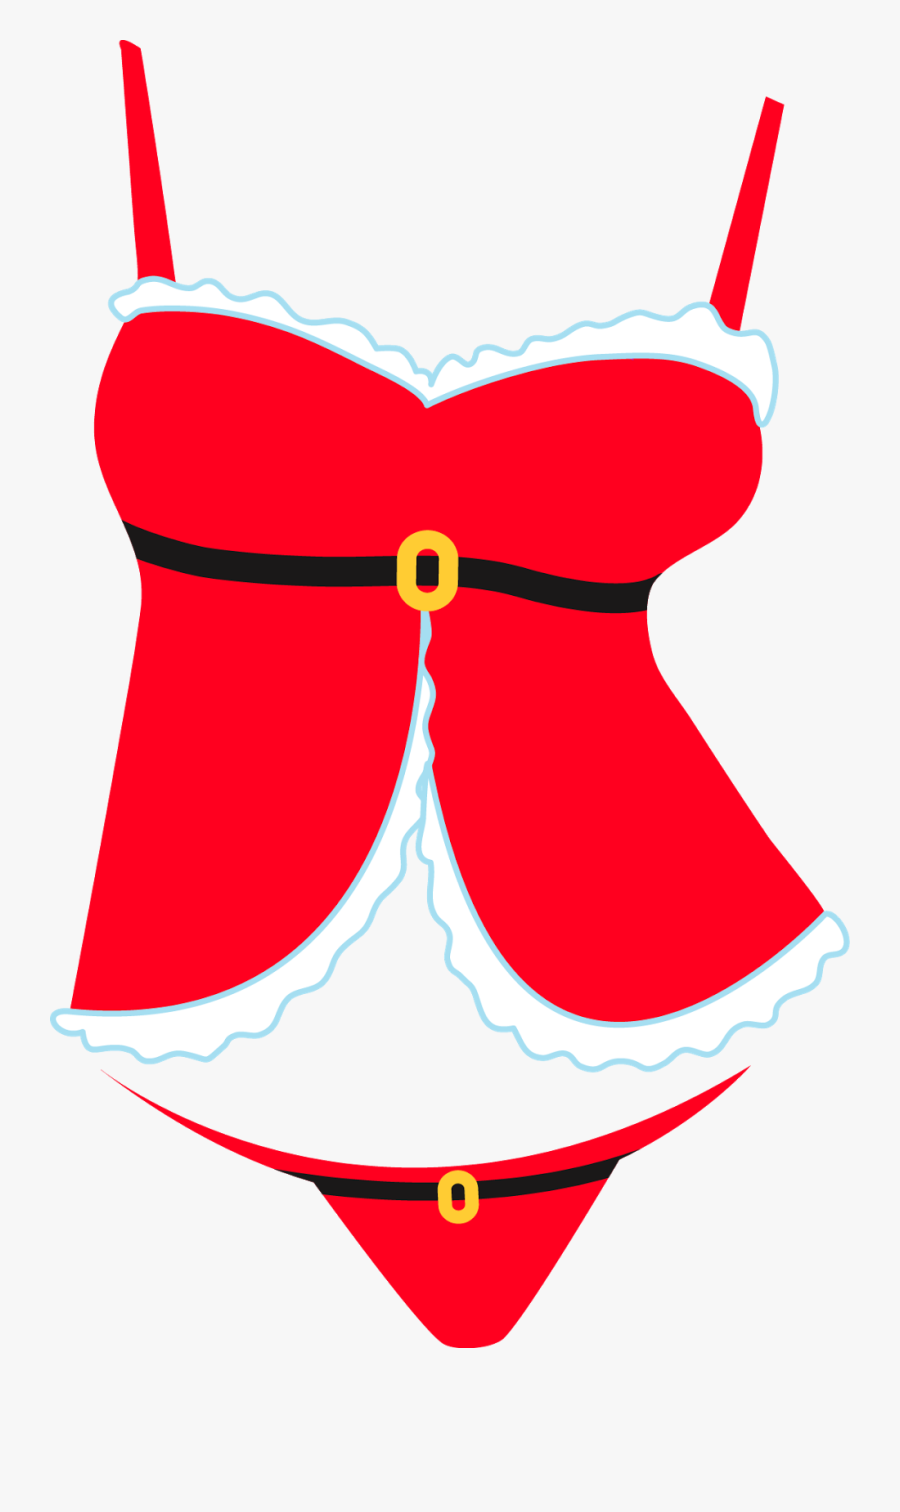 Lingerie Inspired In Santa Images - Clipart Woman Lingerie, Transparent Clipart